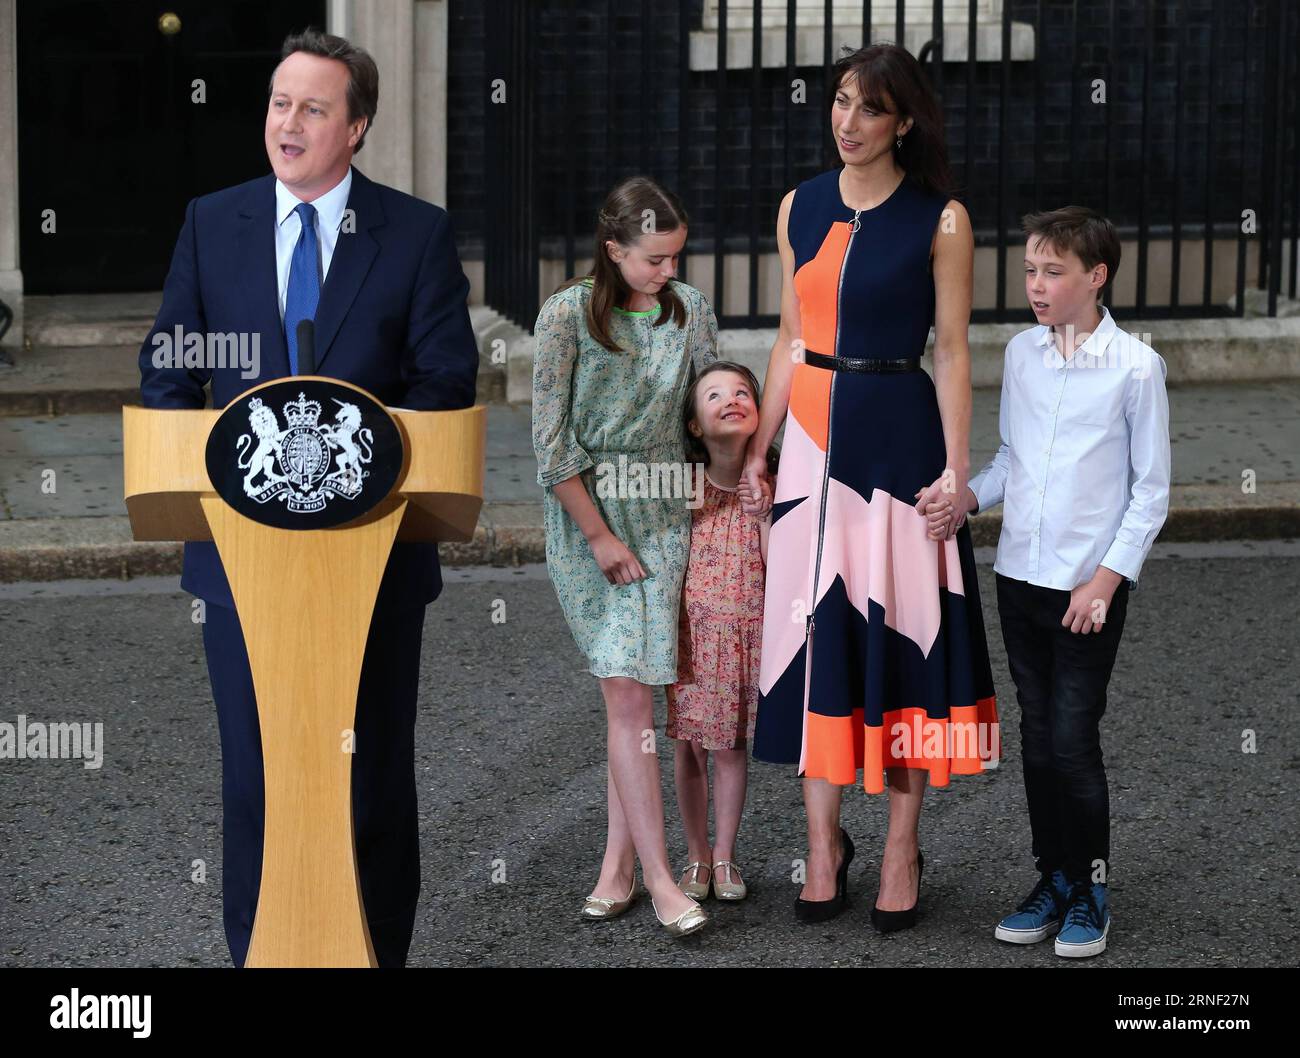 (160713) -- LONDON, JULY 13, 2016 -- British outgoing Prime Minister David Cameron(1st, L) gives a speech before leaving 10 Downing Street in London, Britain on July 13, 2016. Cameron bid farewell to 10 Downing Street and headed to Buckingham Palace to offer his resignation to Queen Elizabeth II on Wednesday afternoon. ) BRITAIN-LONDON-DAVID CAMERON-RESIGNATION HanxYan PUBLICATIONxNOTxINxCHN   160713 London July 13 2016 British Outgoing Prime Ministers David Cameron 1st l Gives a Speech Before leaving 10 Downing Street in London Britain ON July 13 2016 Cameron BID Farewell to 10 Downing Street Stock Photo